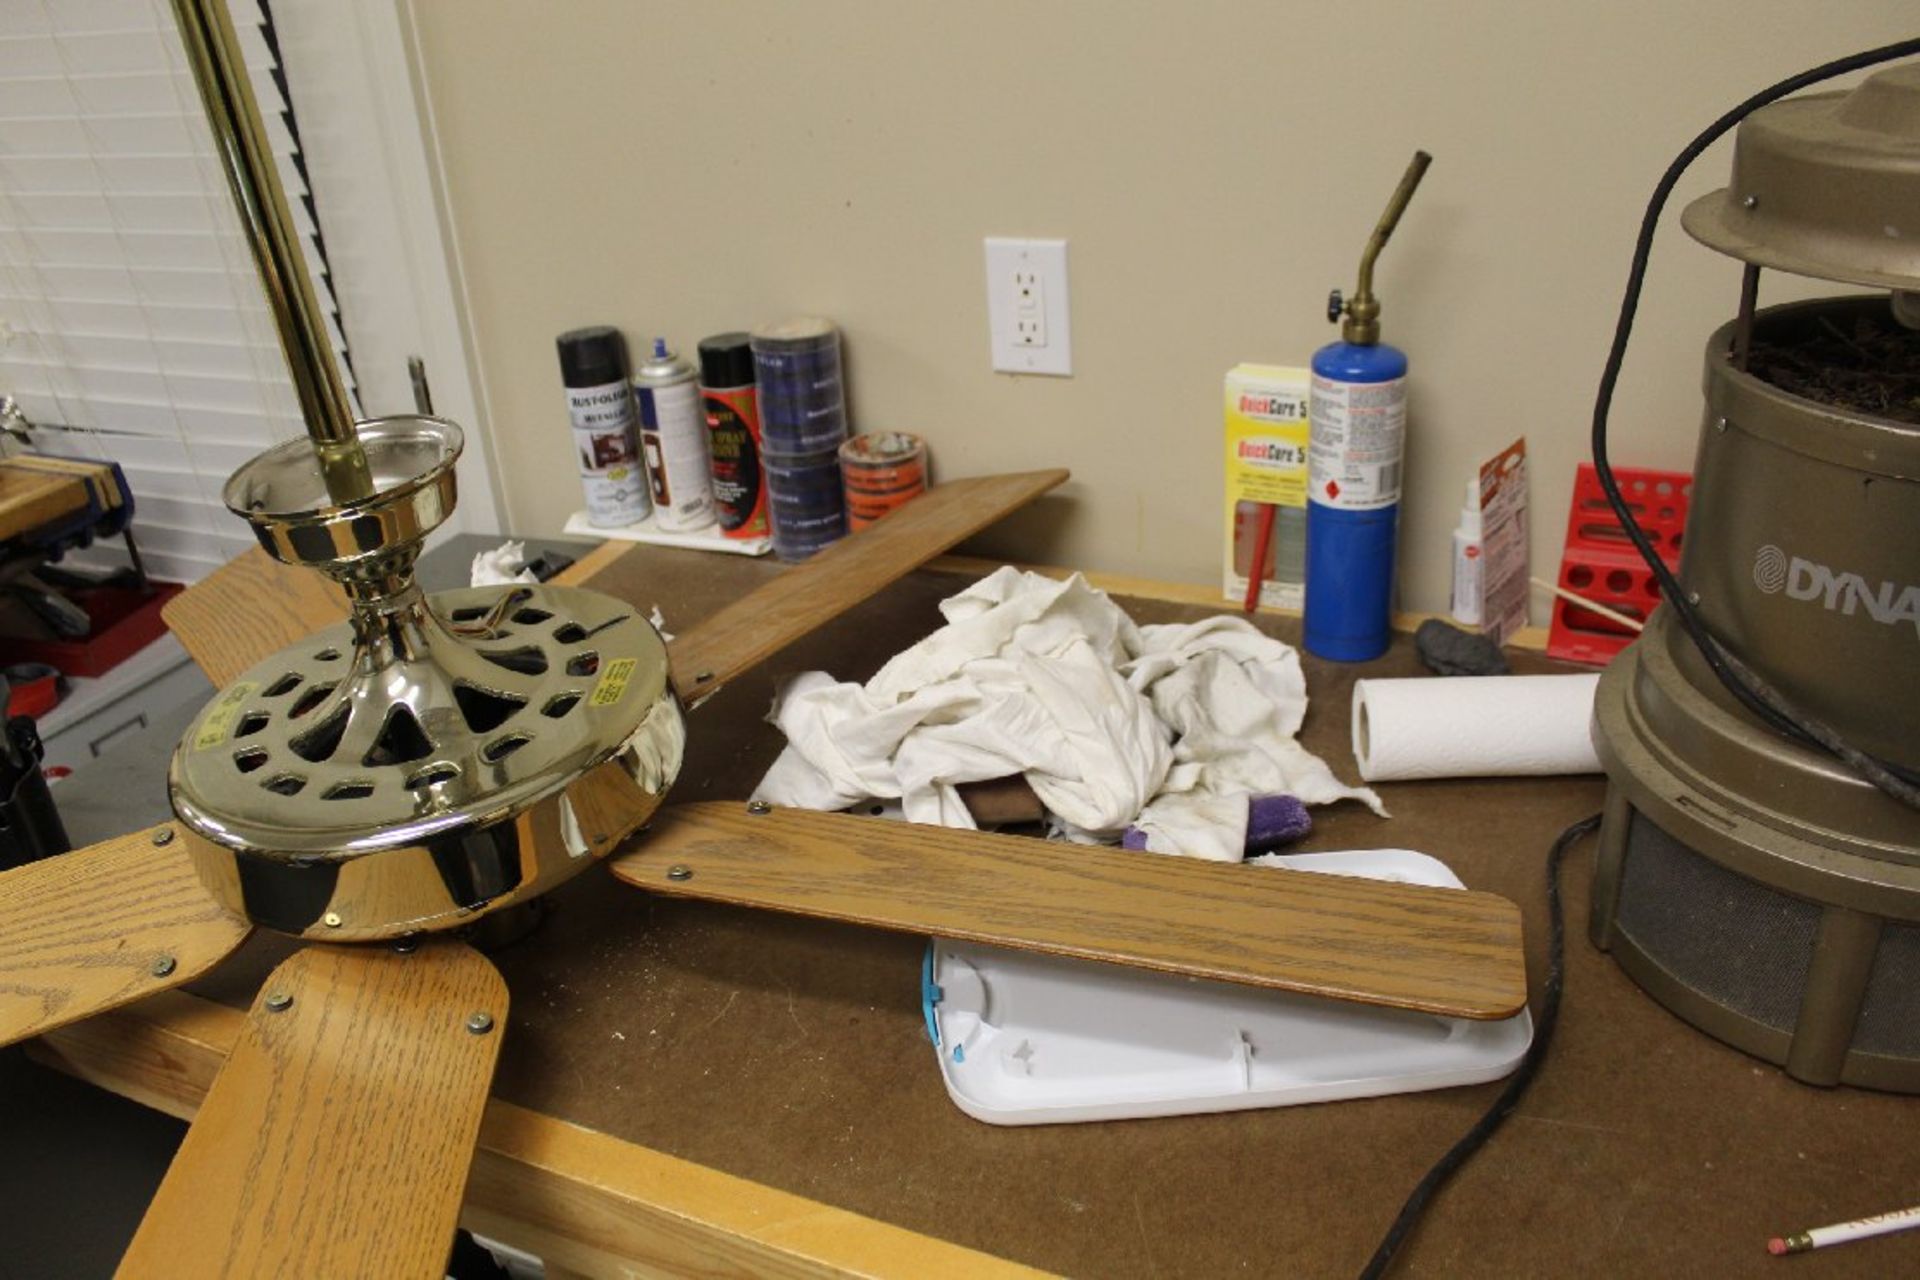 Contents of Table Top & Shelf (from Lot 65), Ceiling Fan, Insect Trap, Tape, Flashlight, - Image 2 of 6